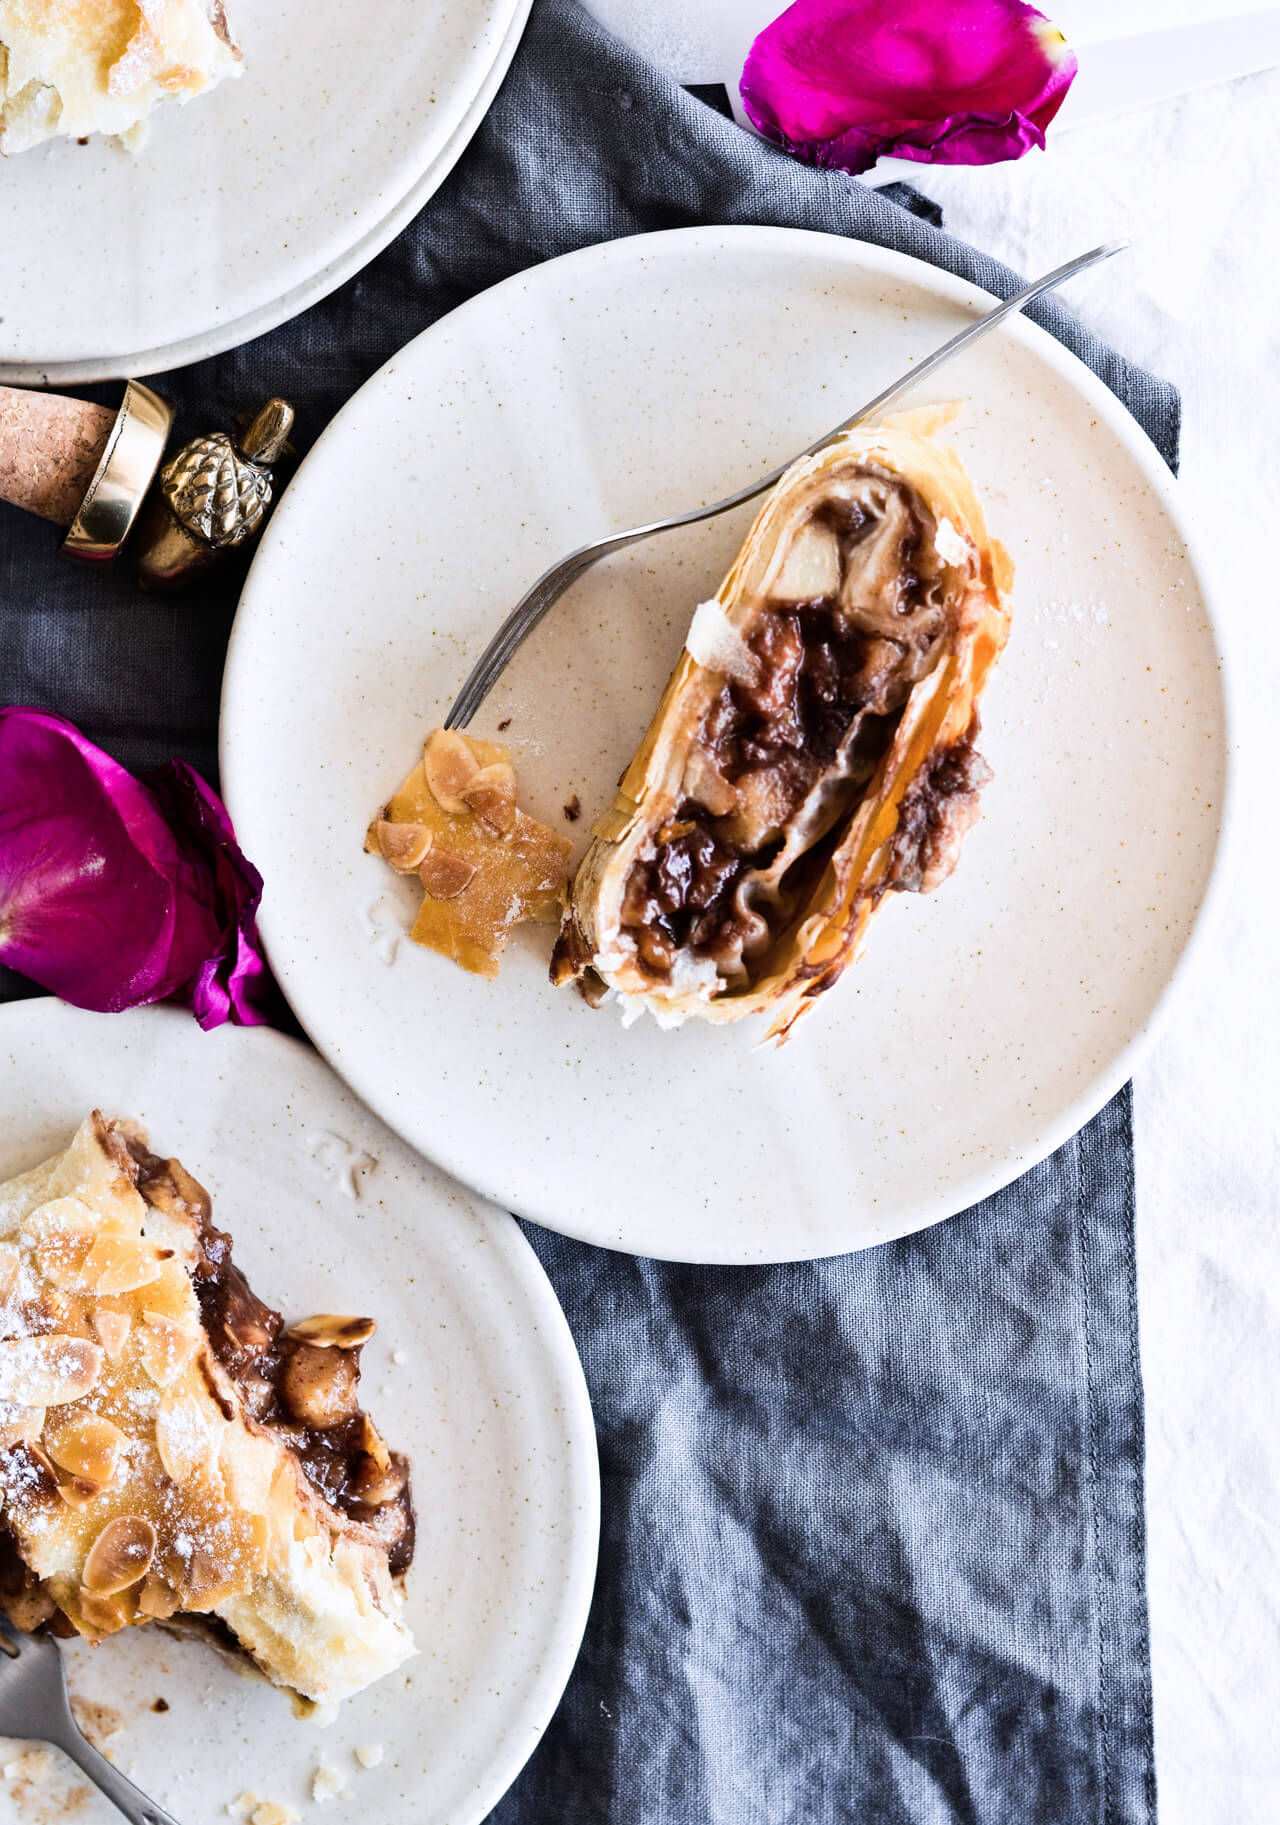 Easy chocolate pear strudel with cinnamon and almond flavor makes the perfect holiday dessert! Great warm or cold, made easily with phyllo pastry. Quick dessert! 